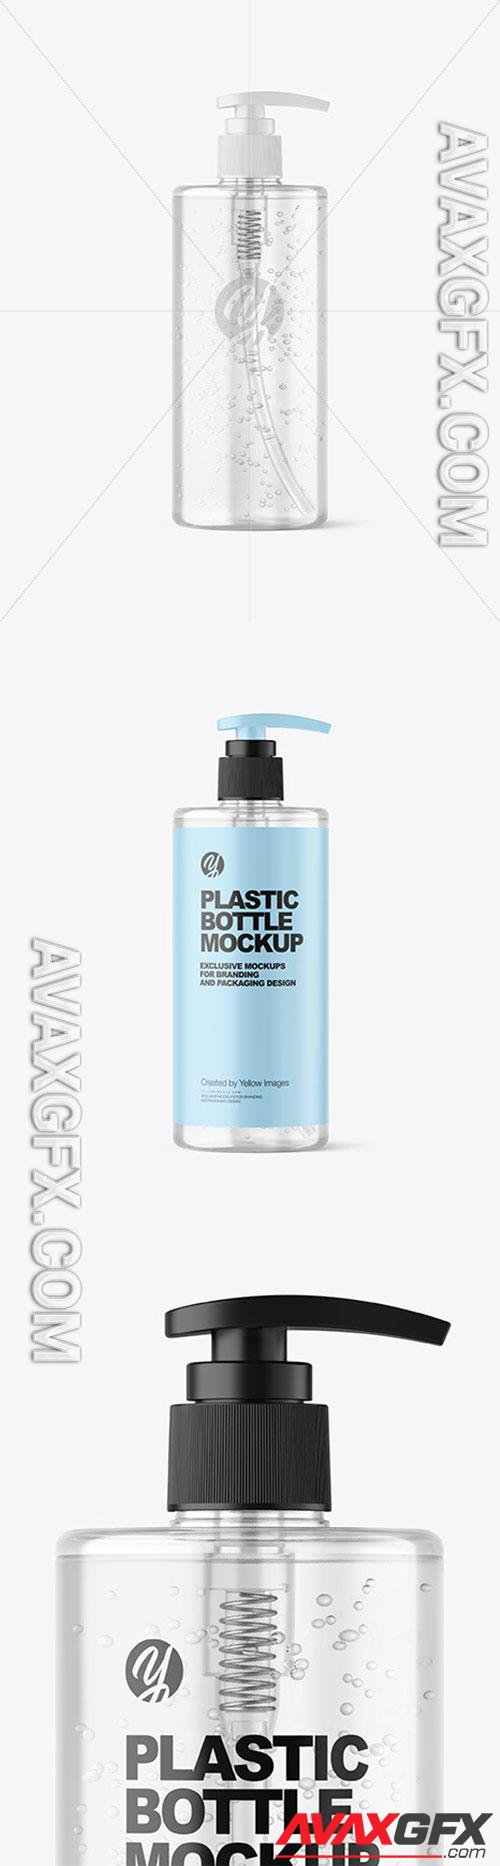 Clear Cosmetic Bottle with Pump Mockup 86455 TIF